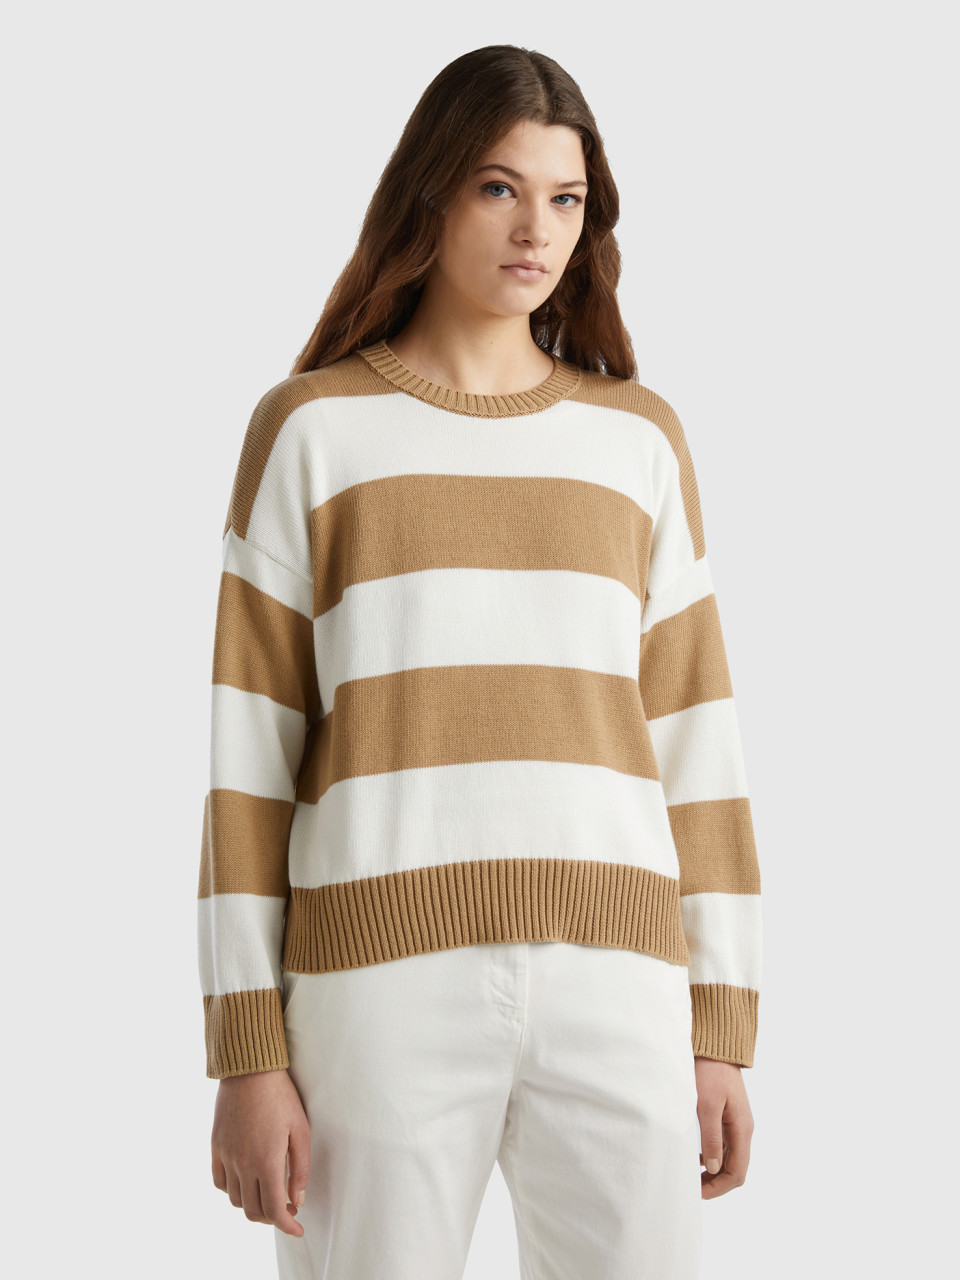 Benetton, Striped Sweater In Tricot Cotton, Camel, Women